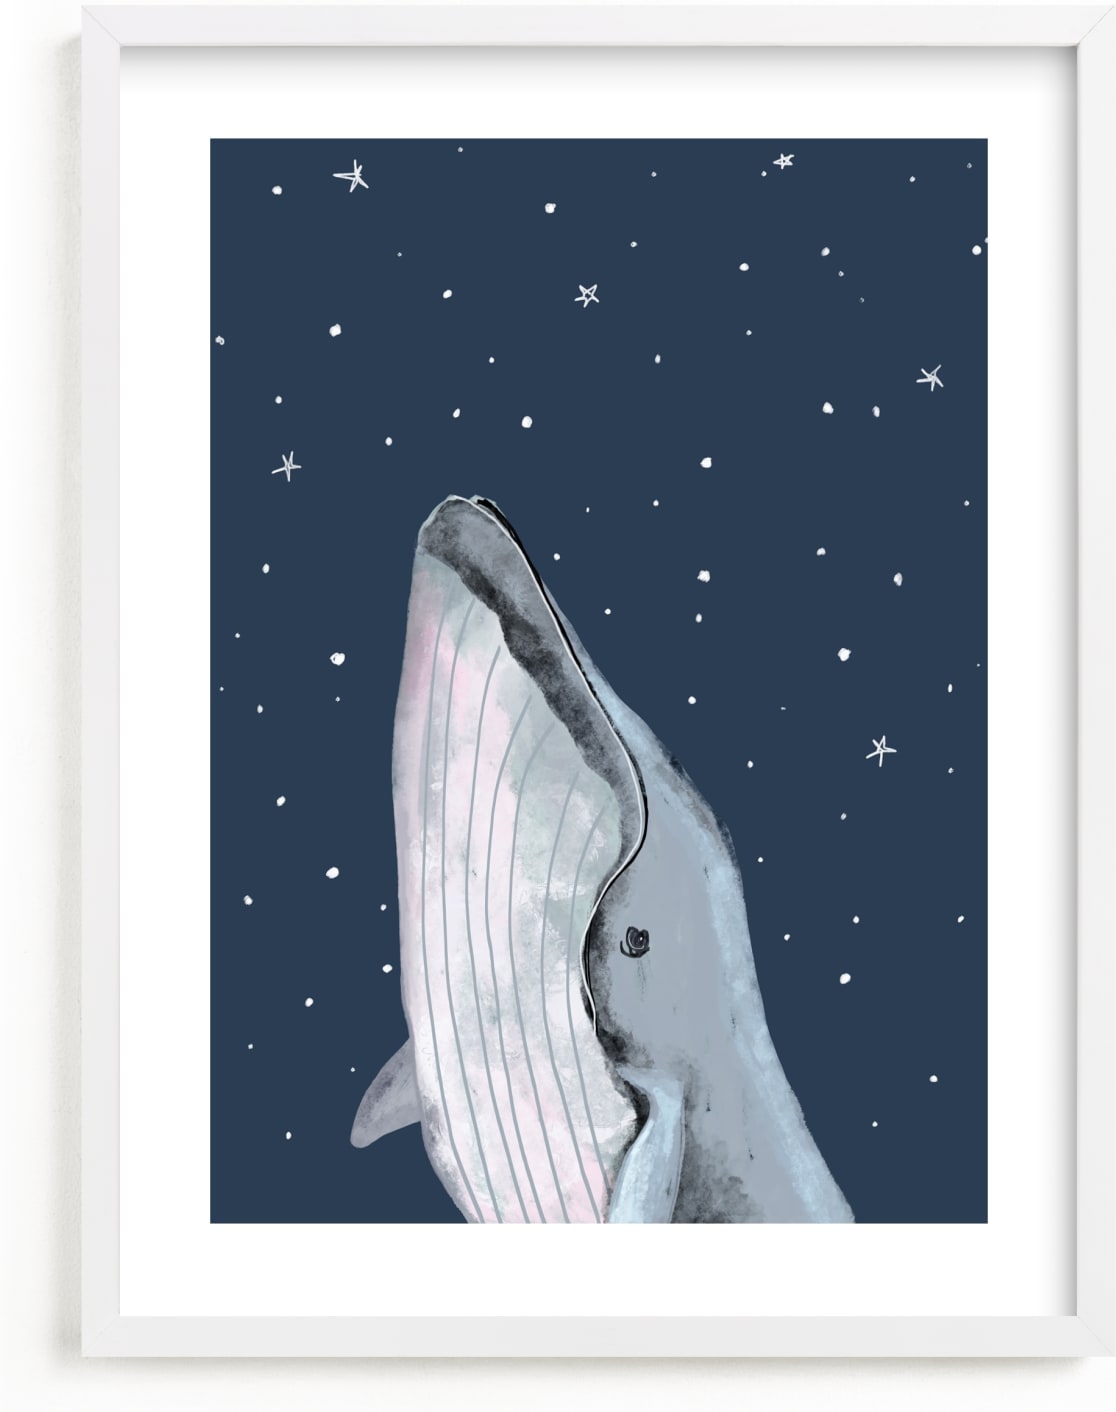 This is a blue art by Cass Loh called starry sky whale.